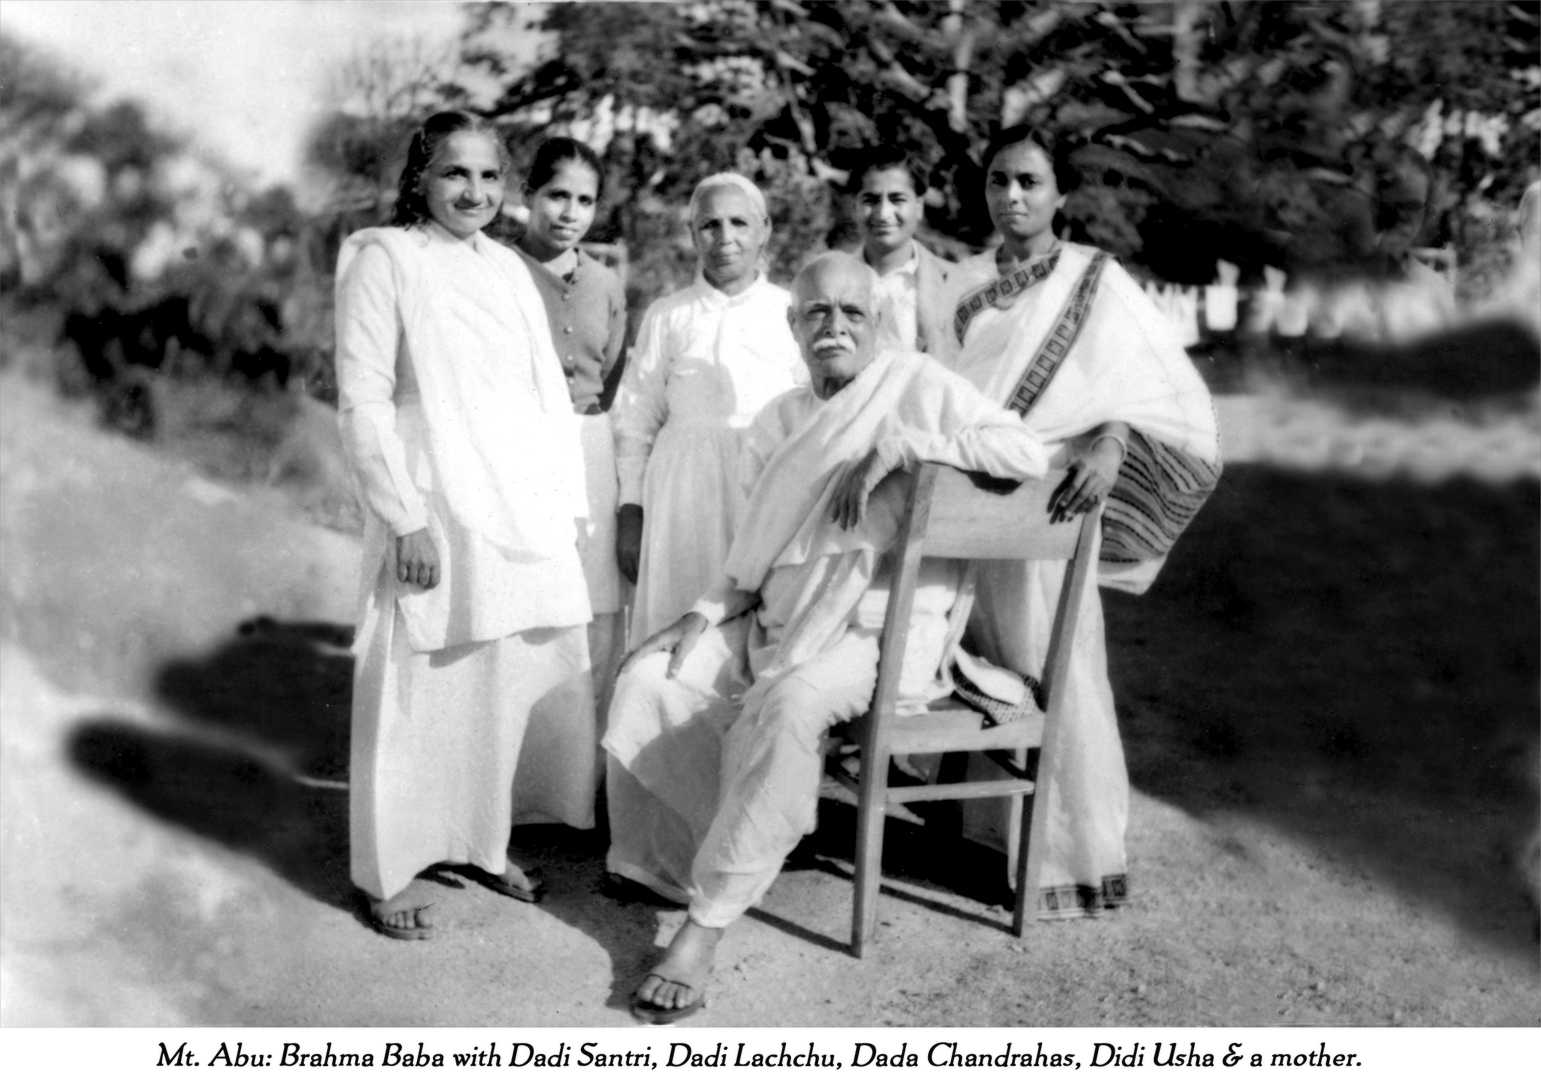 Brahma baba with others - 299